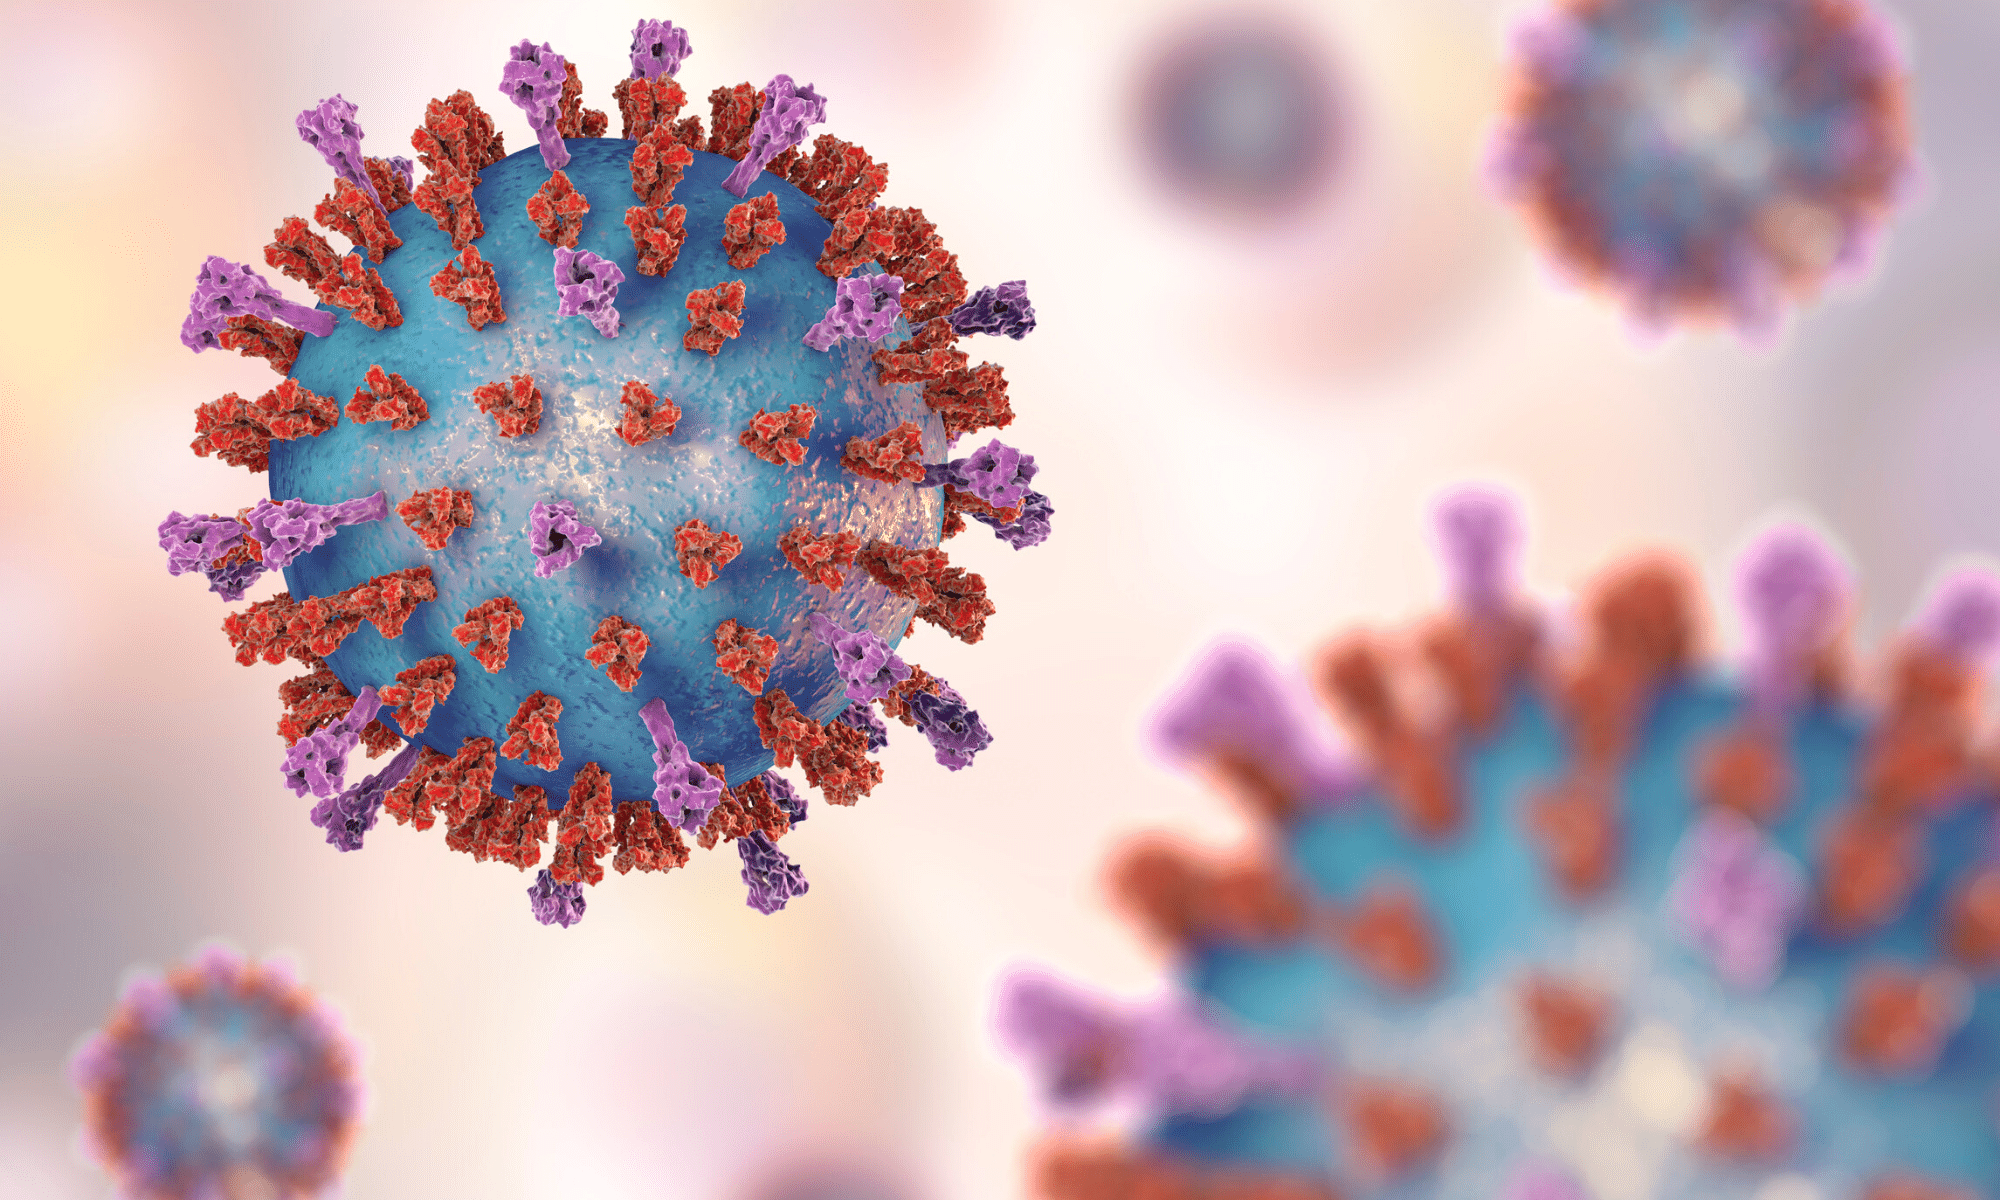 26 Questions to Ask About Coronavirus